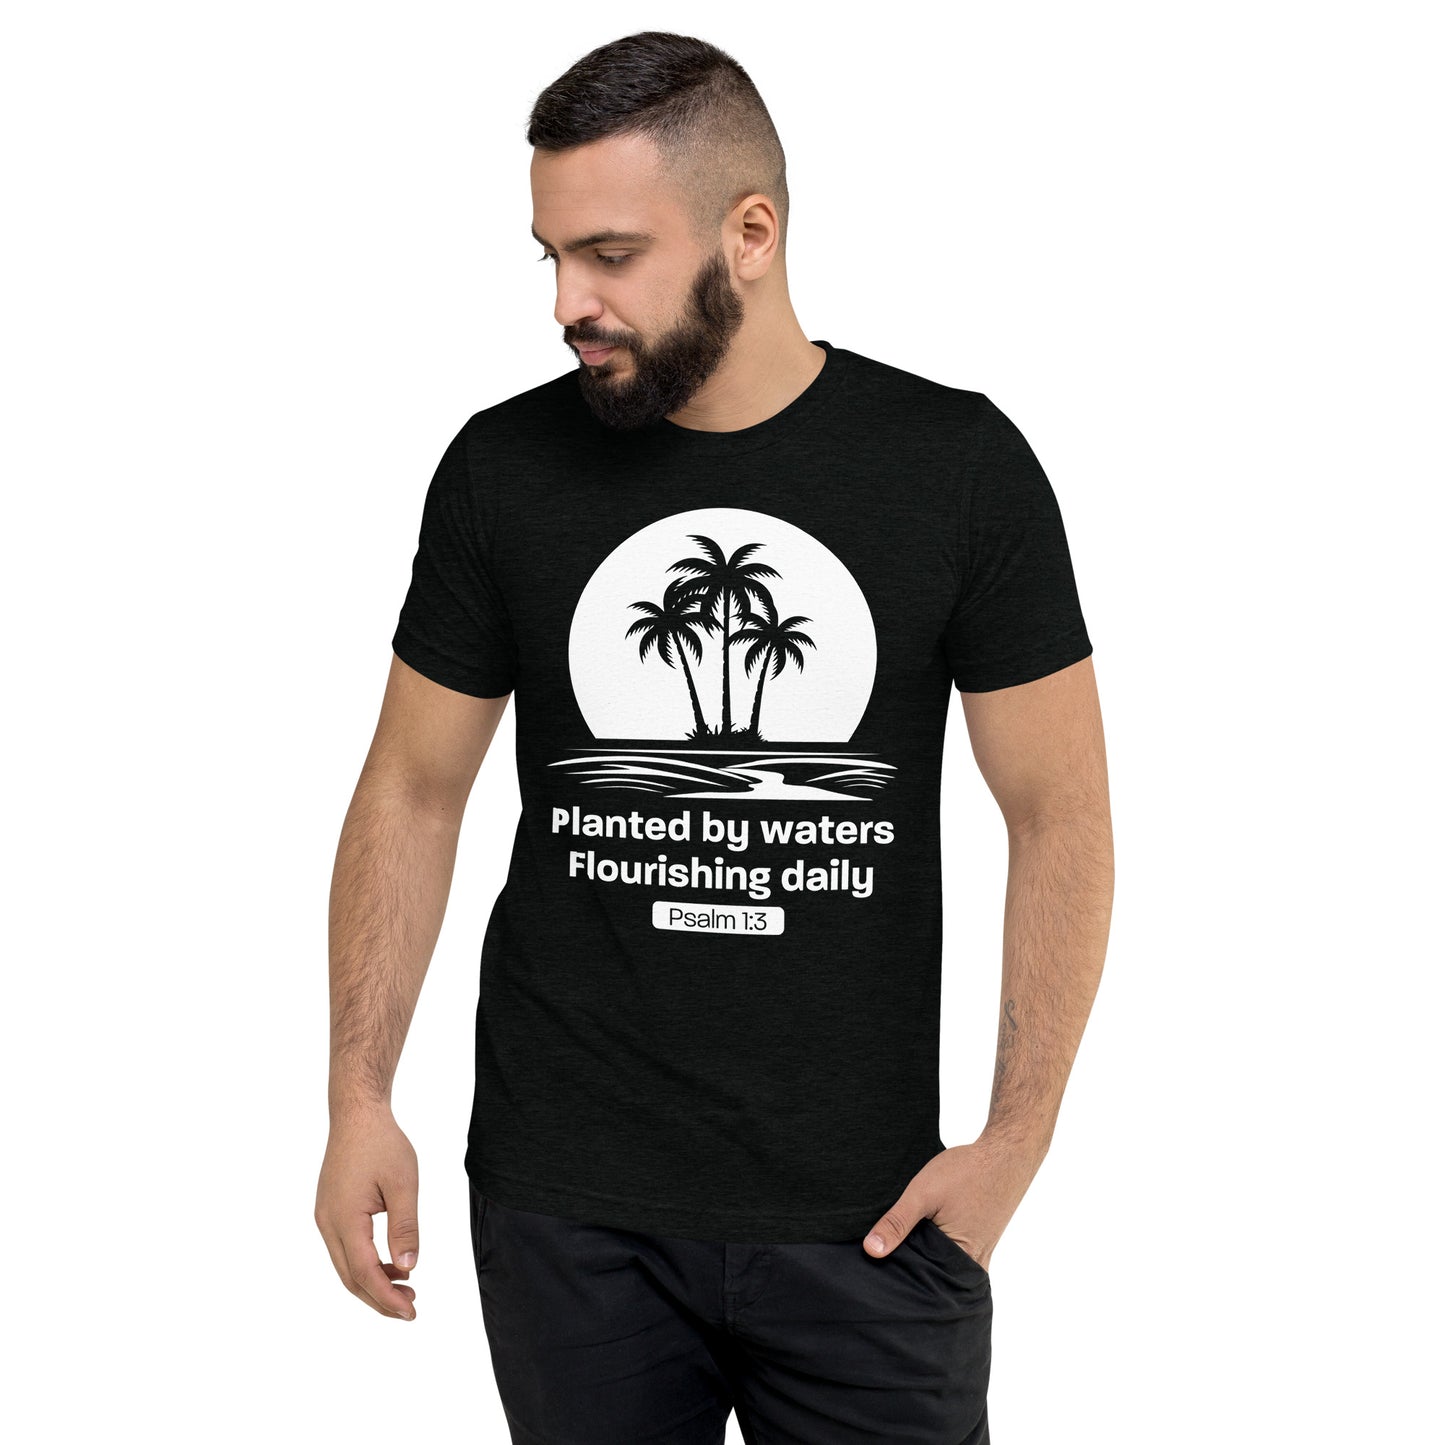 Planted by Waters, Flourishing Daily Ps 1:3 - Vintage Tri-Blend Short Sleeve T-Shirt